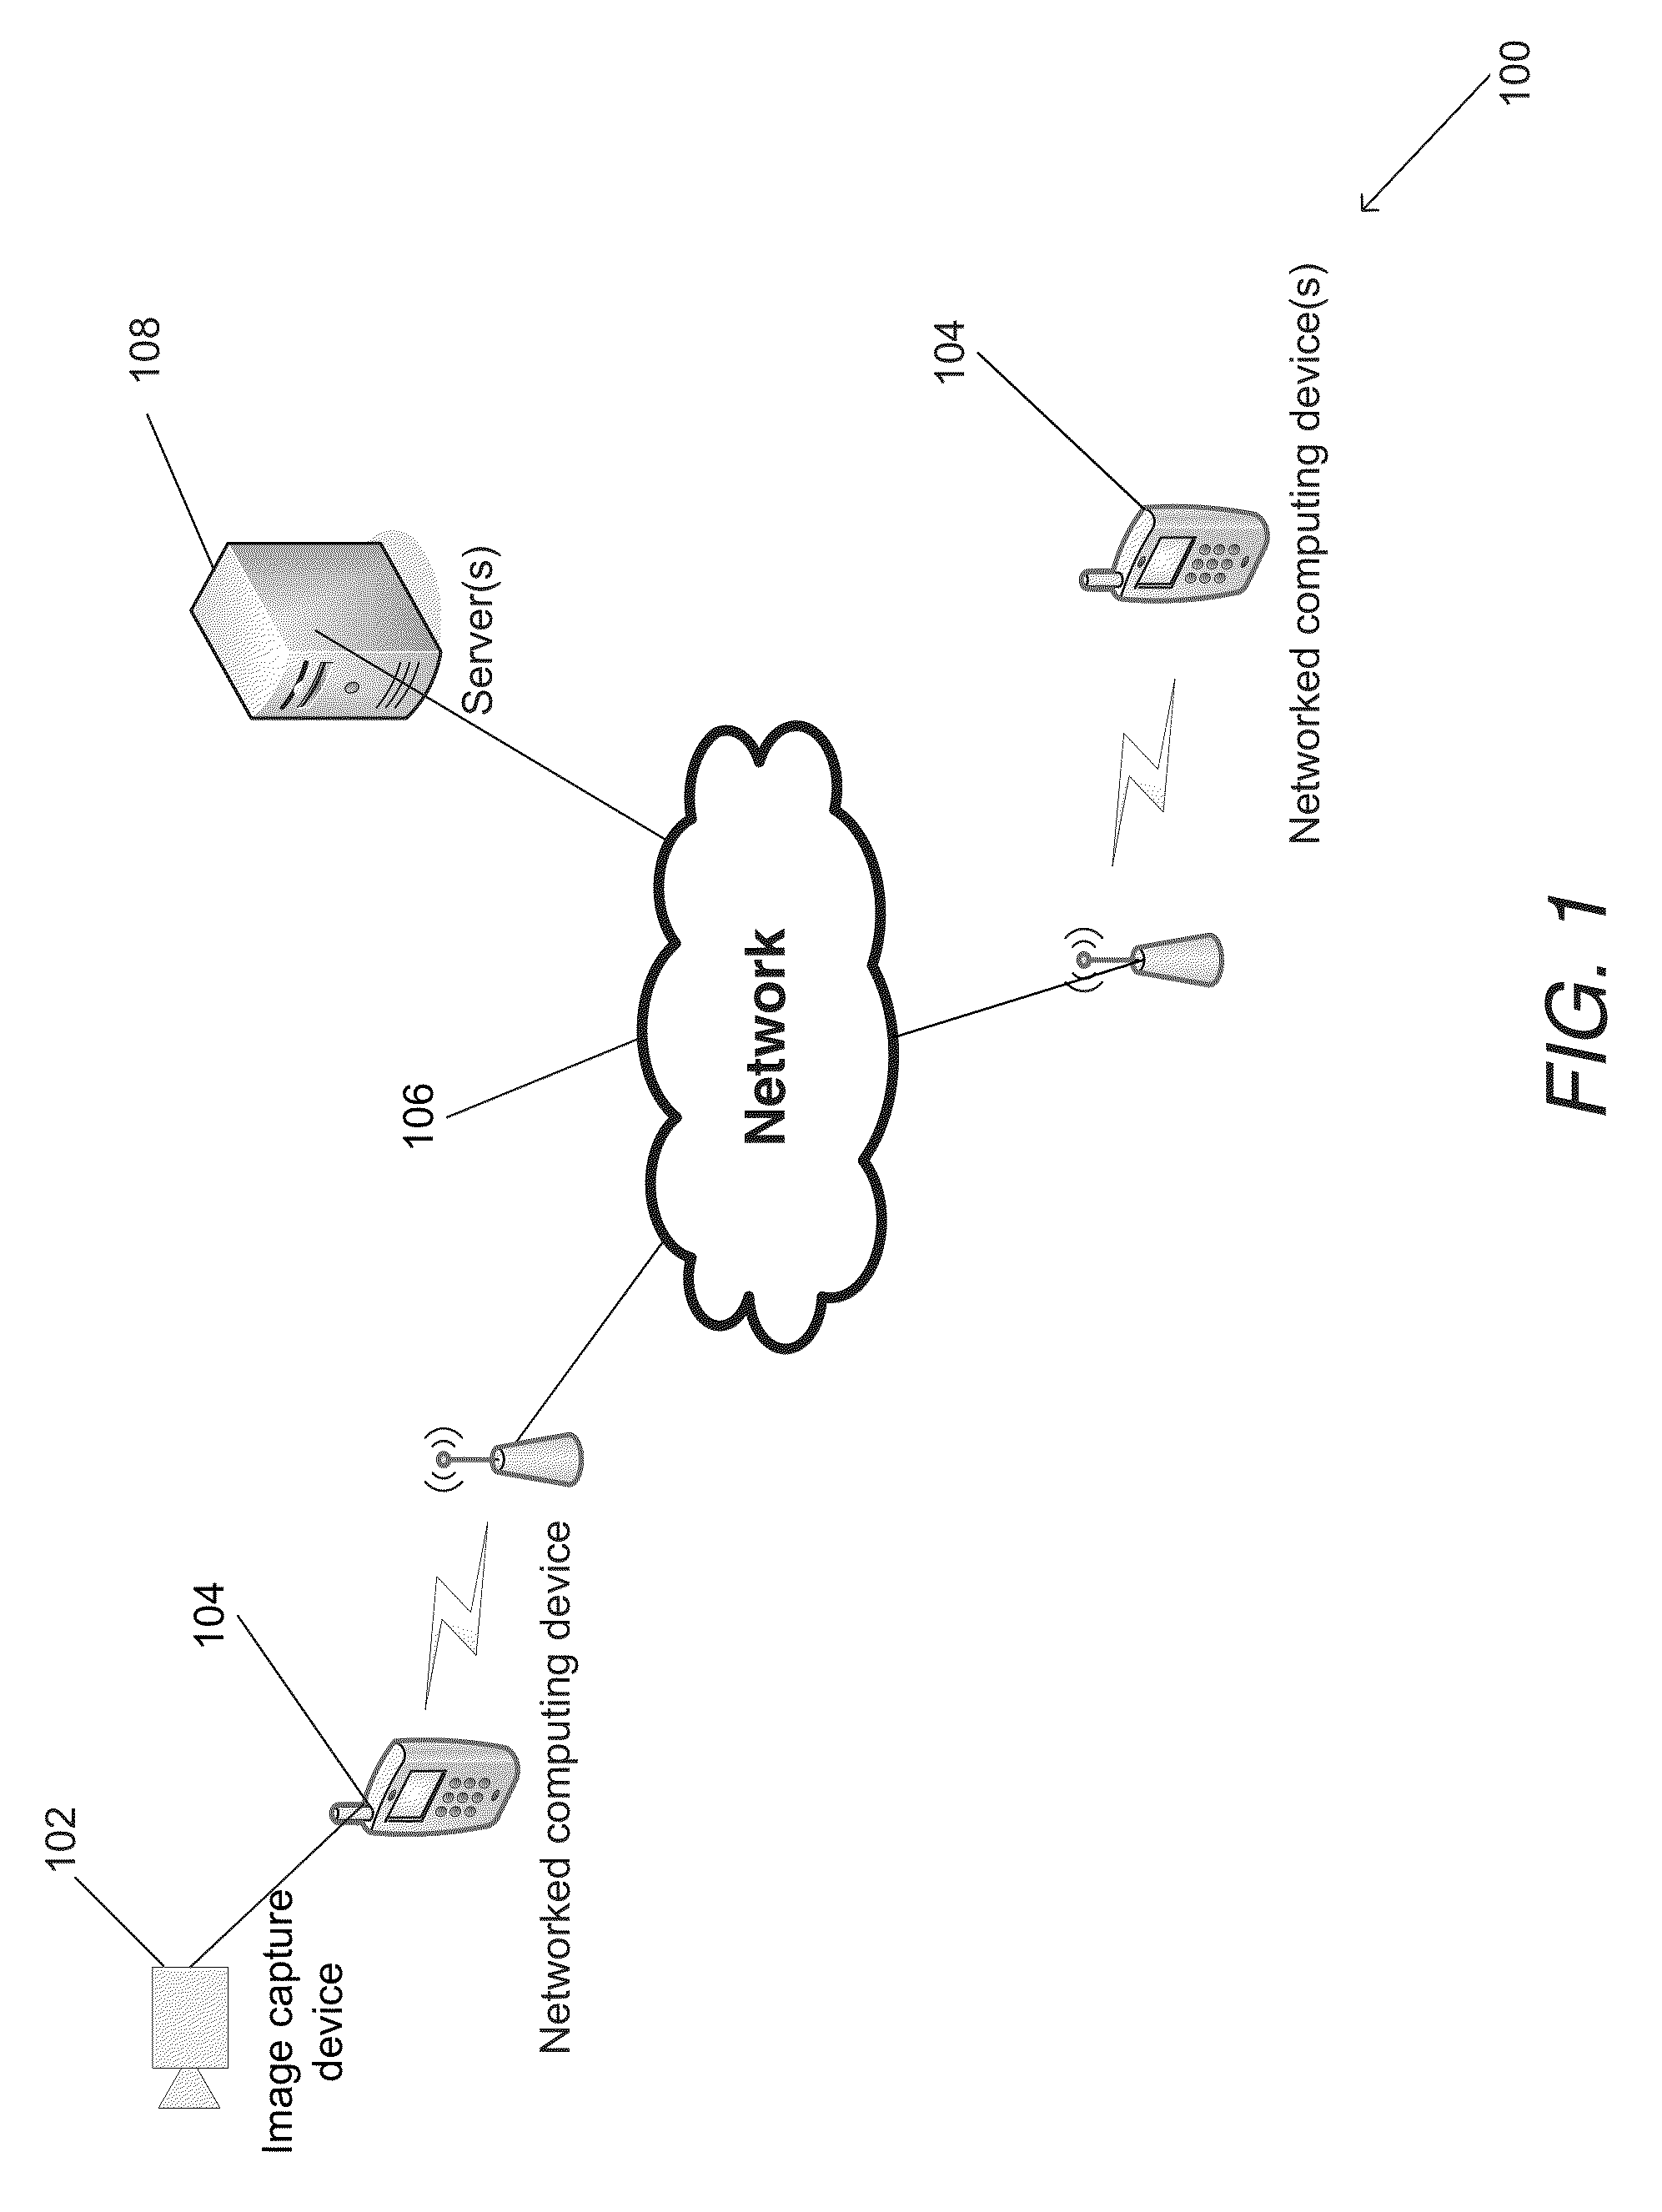 Systems and methods for creating and distributing modifiable animated video messages